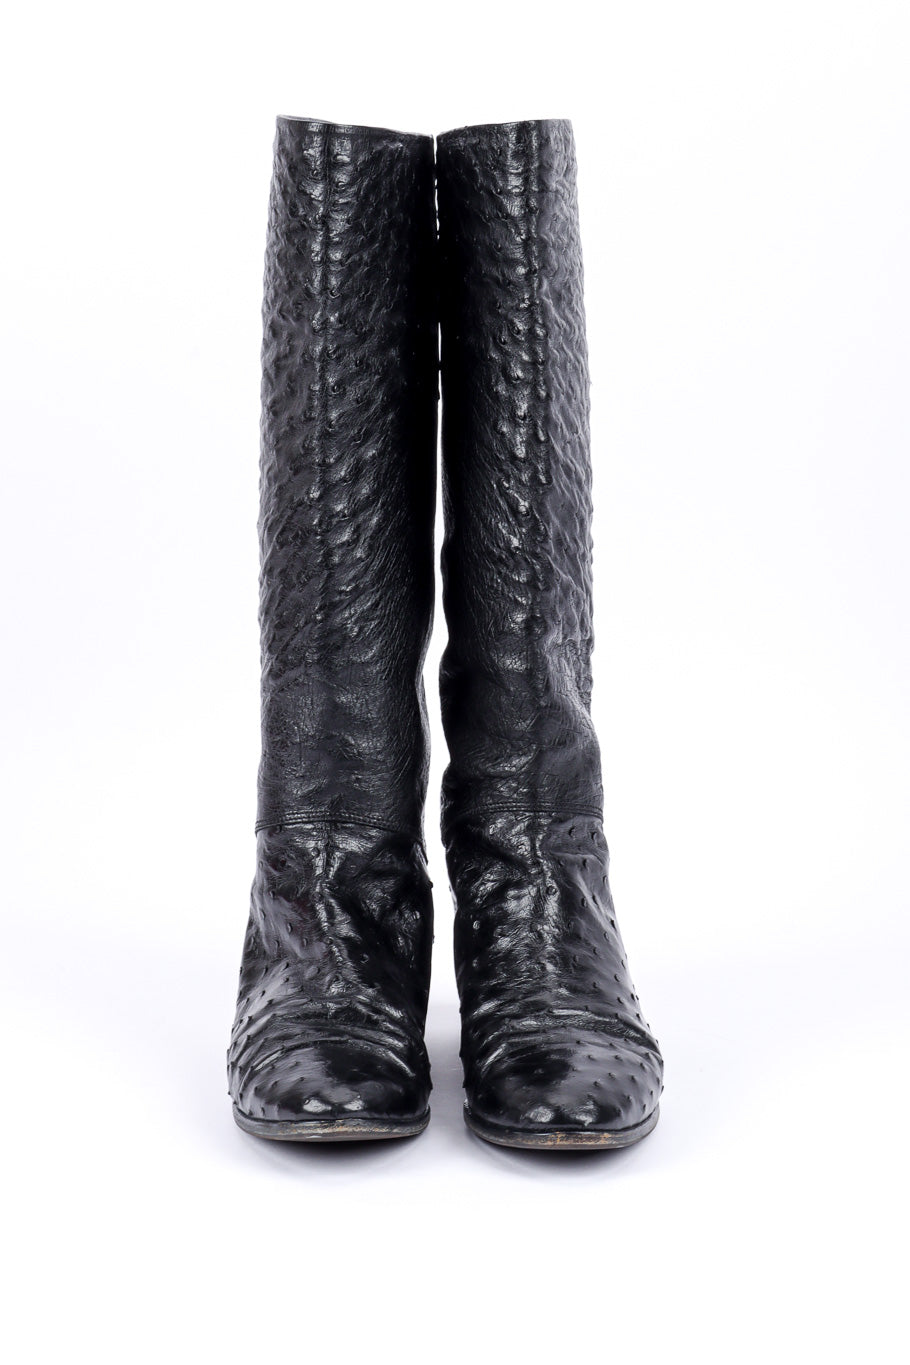 Vintage Gucci Black Ostrich Leather Riding Boot front view @recessla